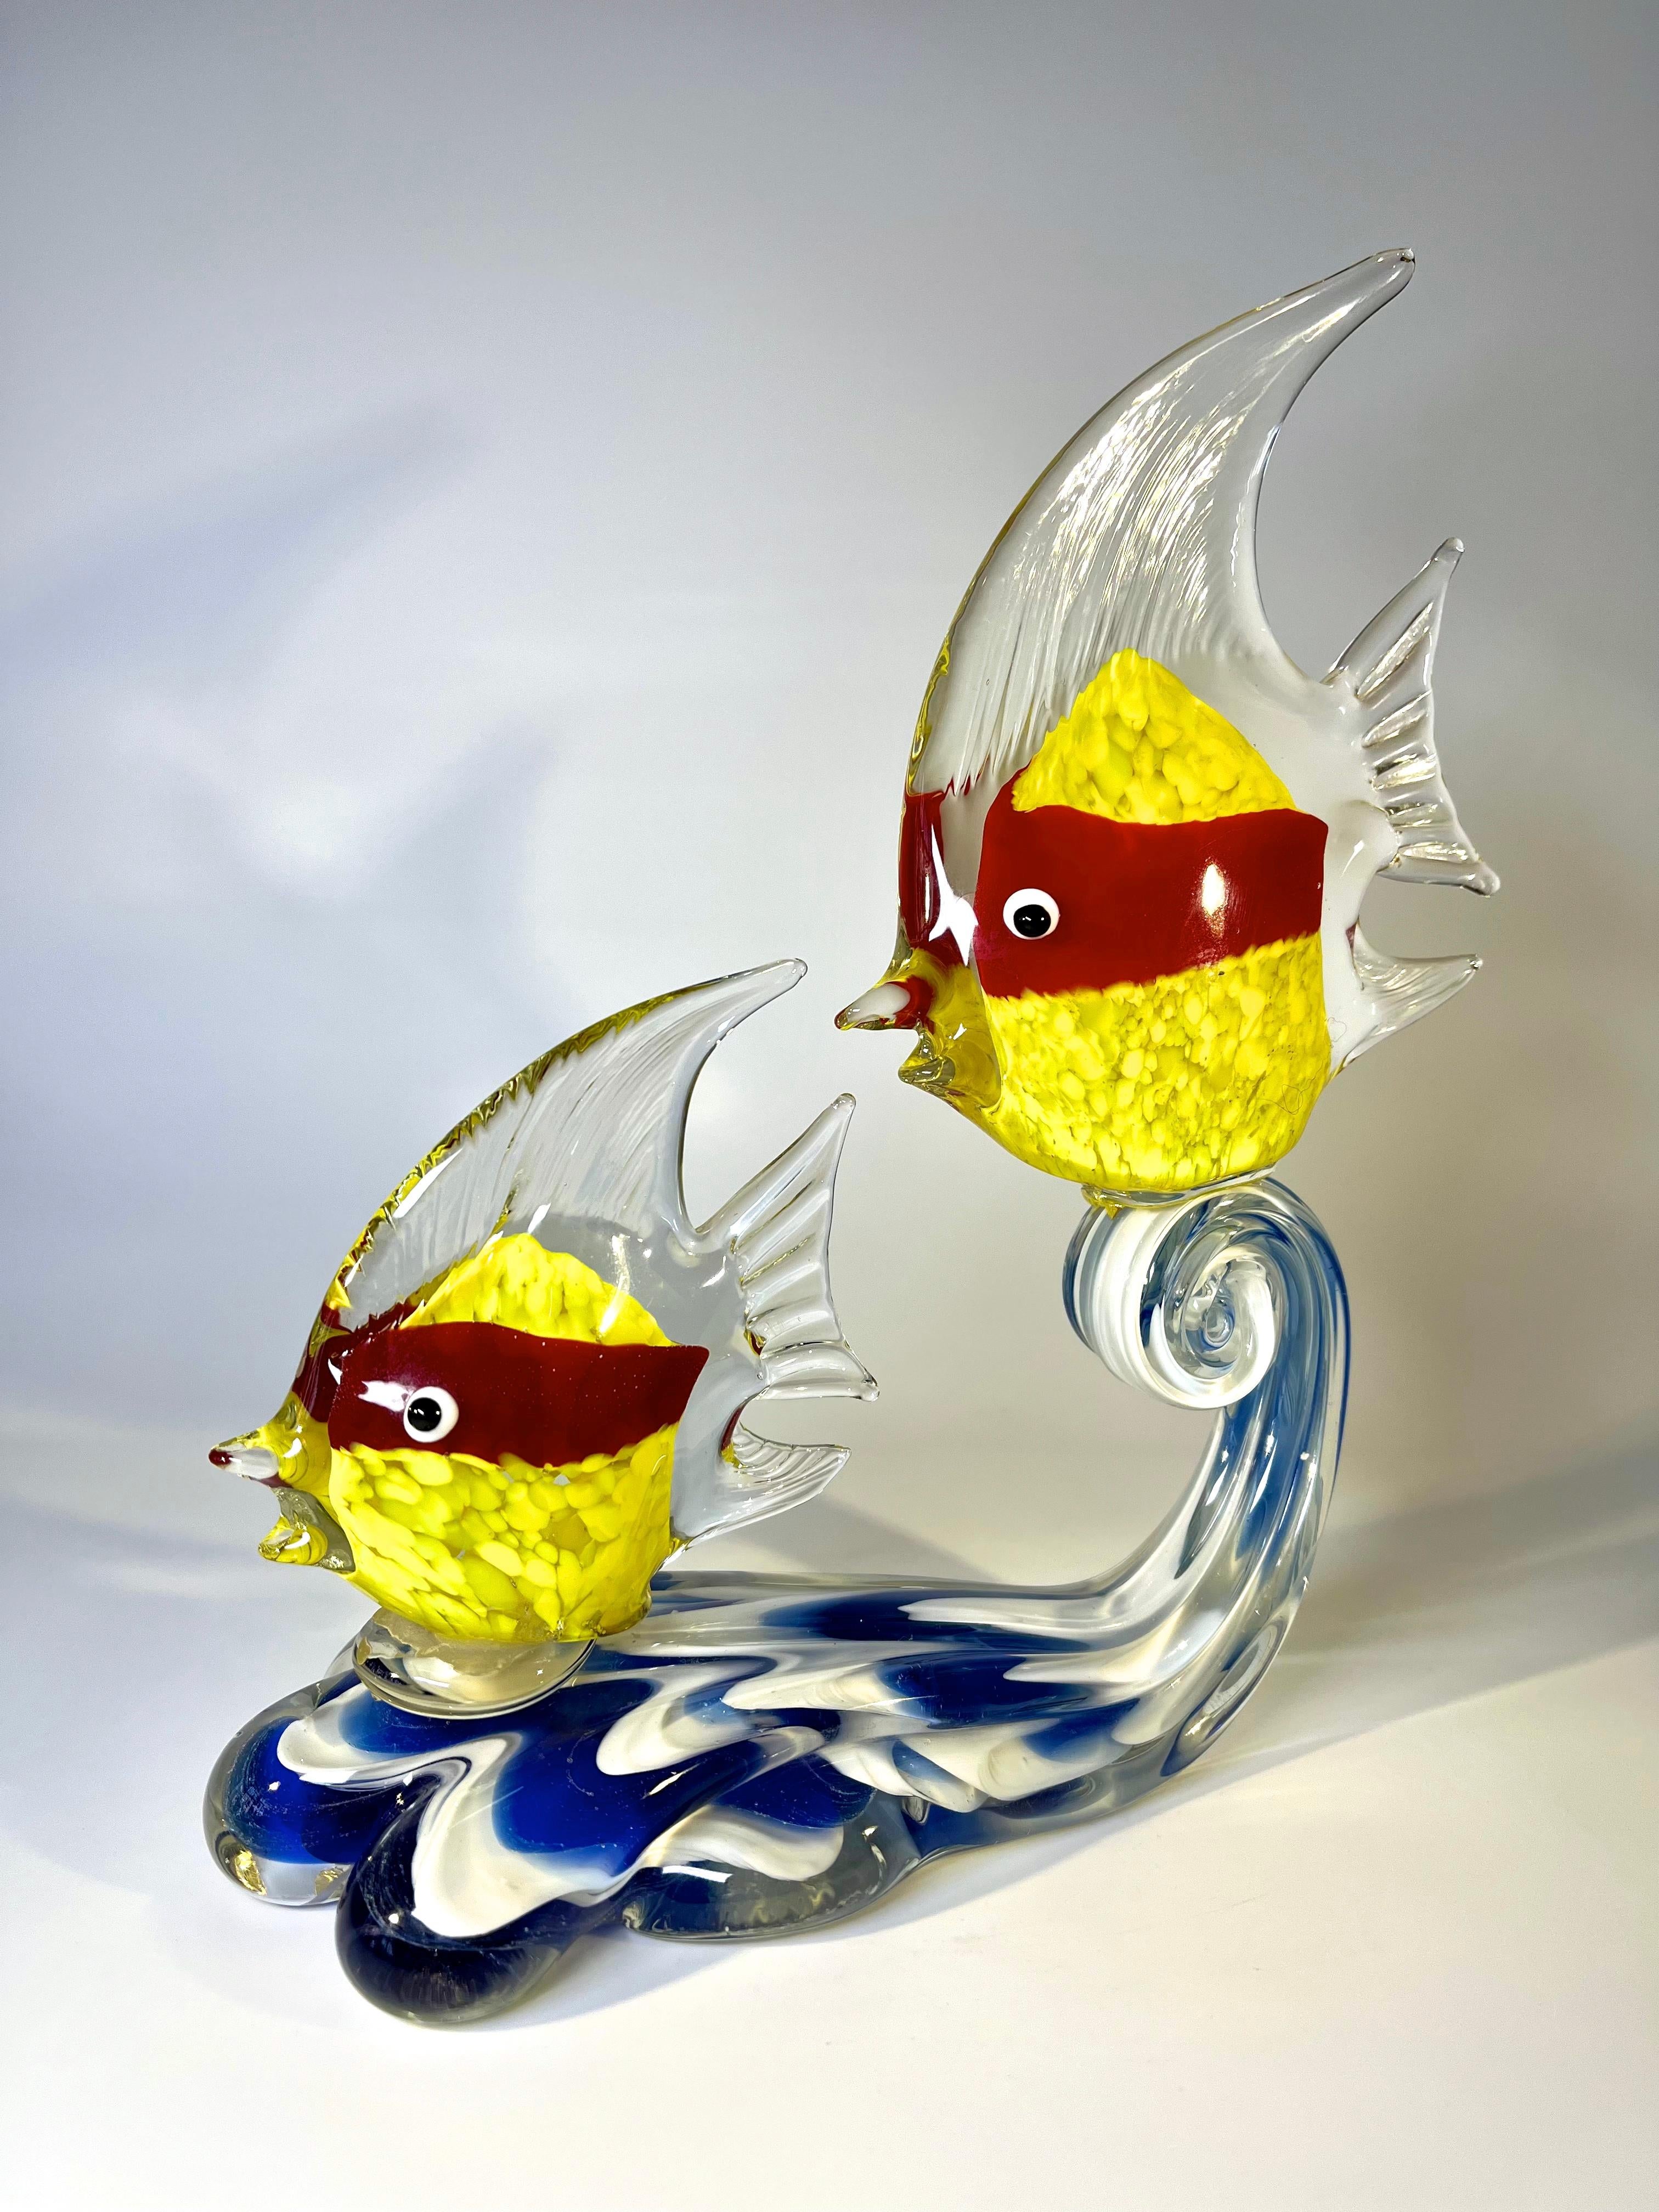 Hilarious pair of Murano Angel fish with a whiff of Ninja about them
Crafted in hand blown glass from Murano, Italy
Circa 1970's
Height 8.5 inch,  Width 3.25 inch, Depth 7.5inch
In very good condition
Wear consistent with age and use